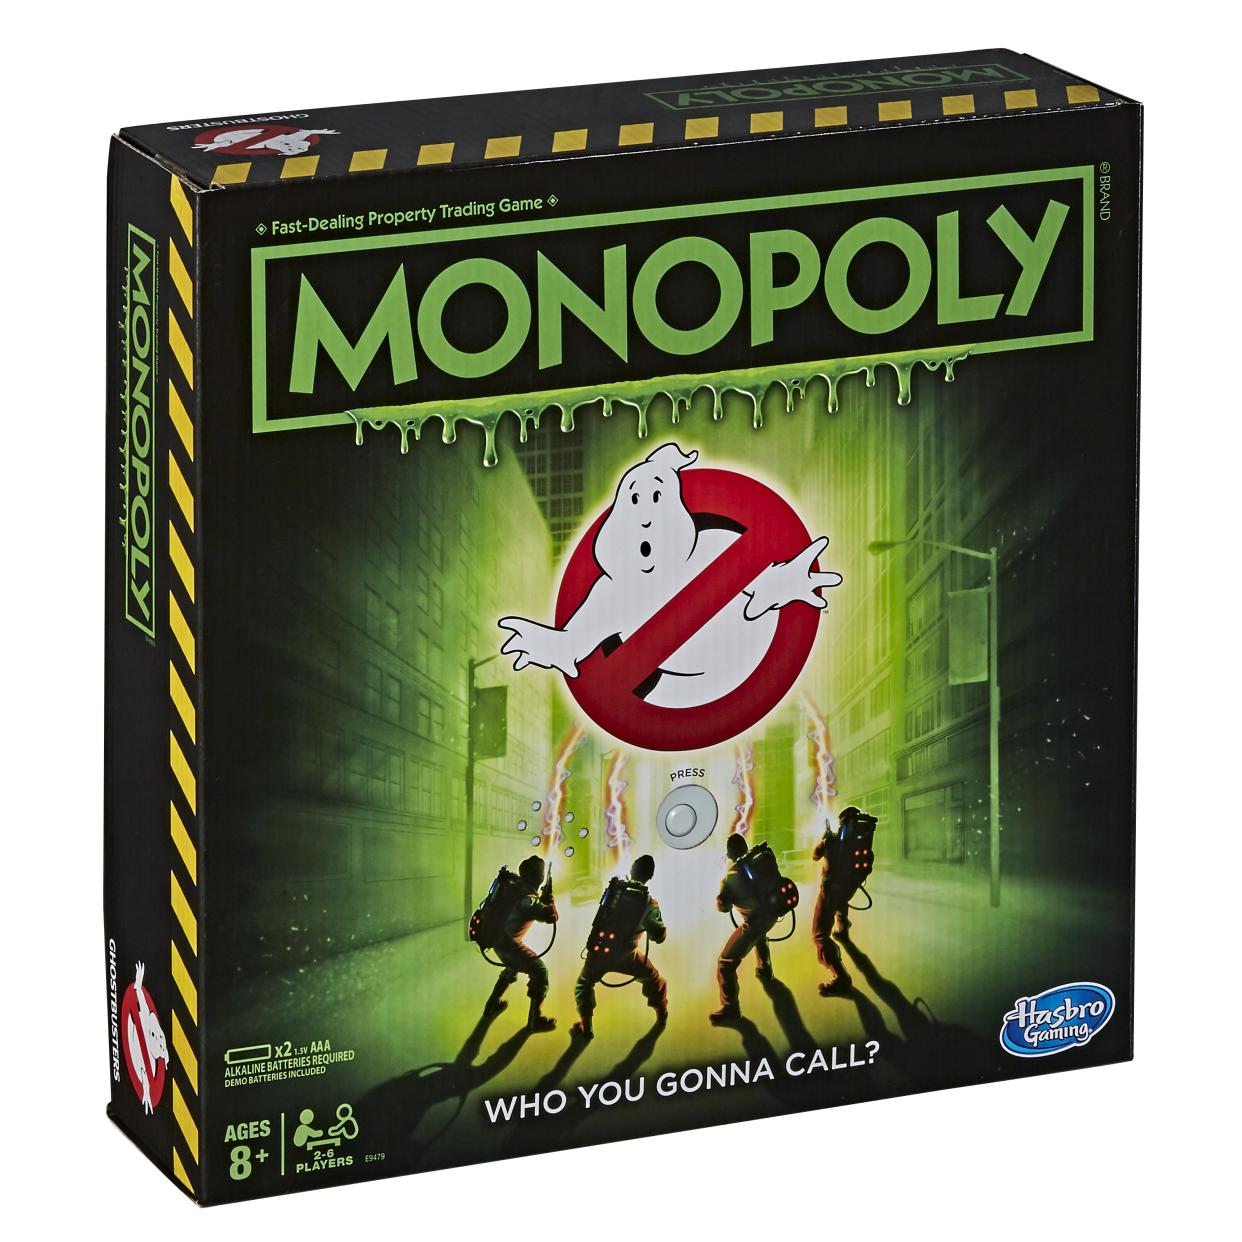 'Monopoly: Ghostbusters Edition' brings the ghostbusting home (Photo: Hasbro)